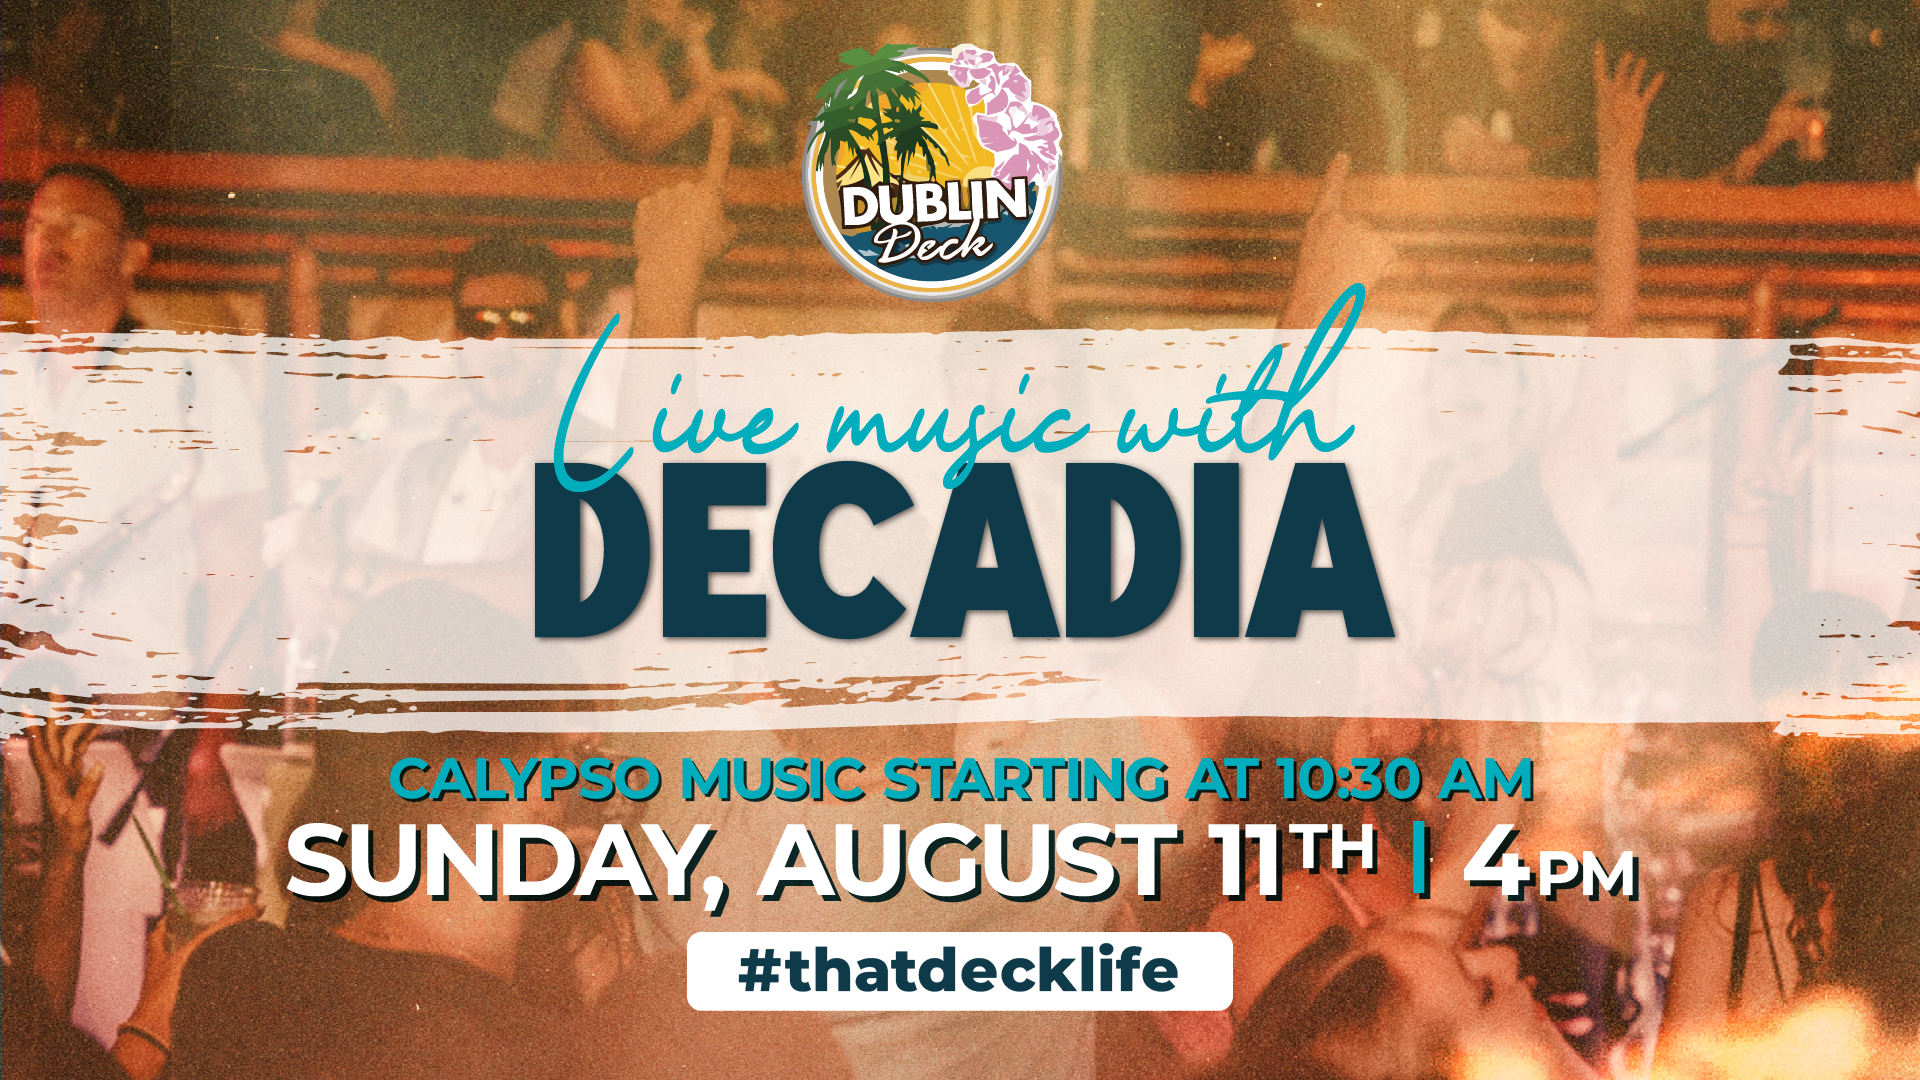 live music flyer for august 11th at 4pm with a performance by decadia